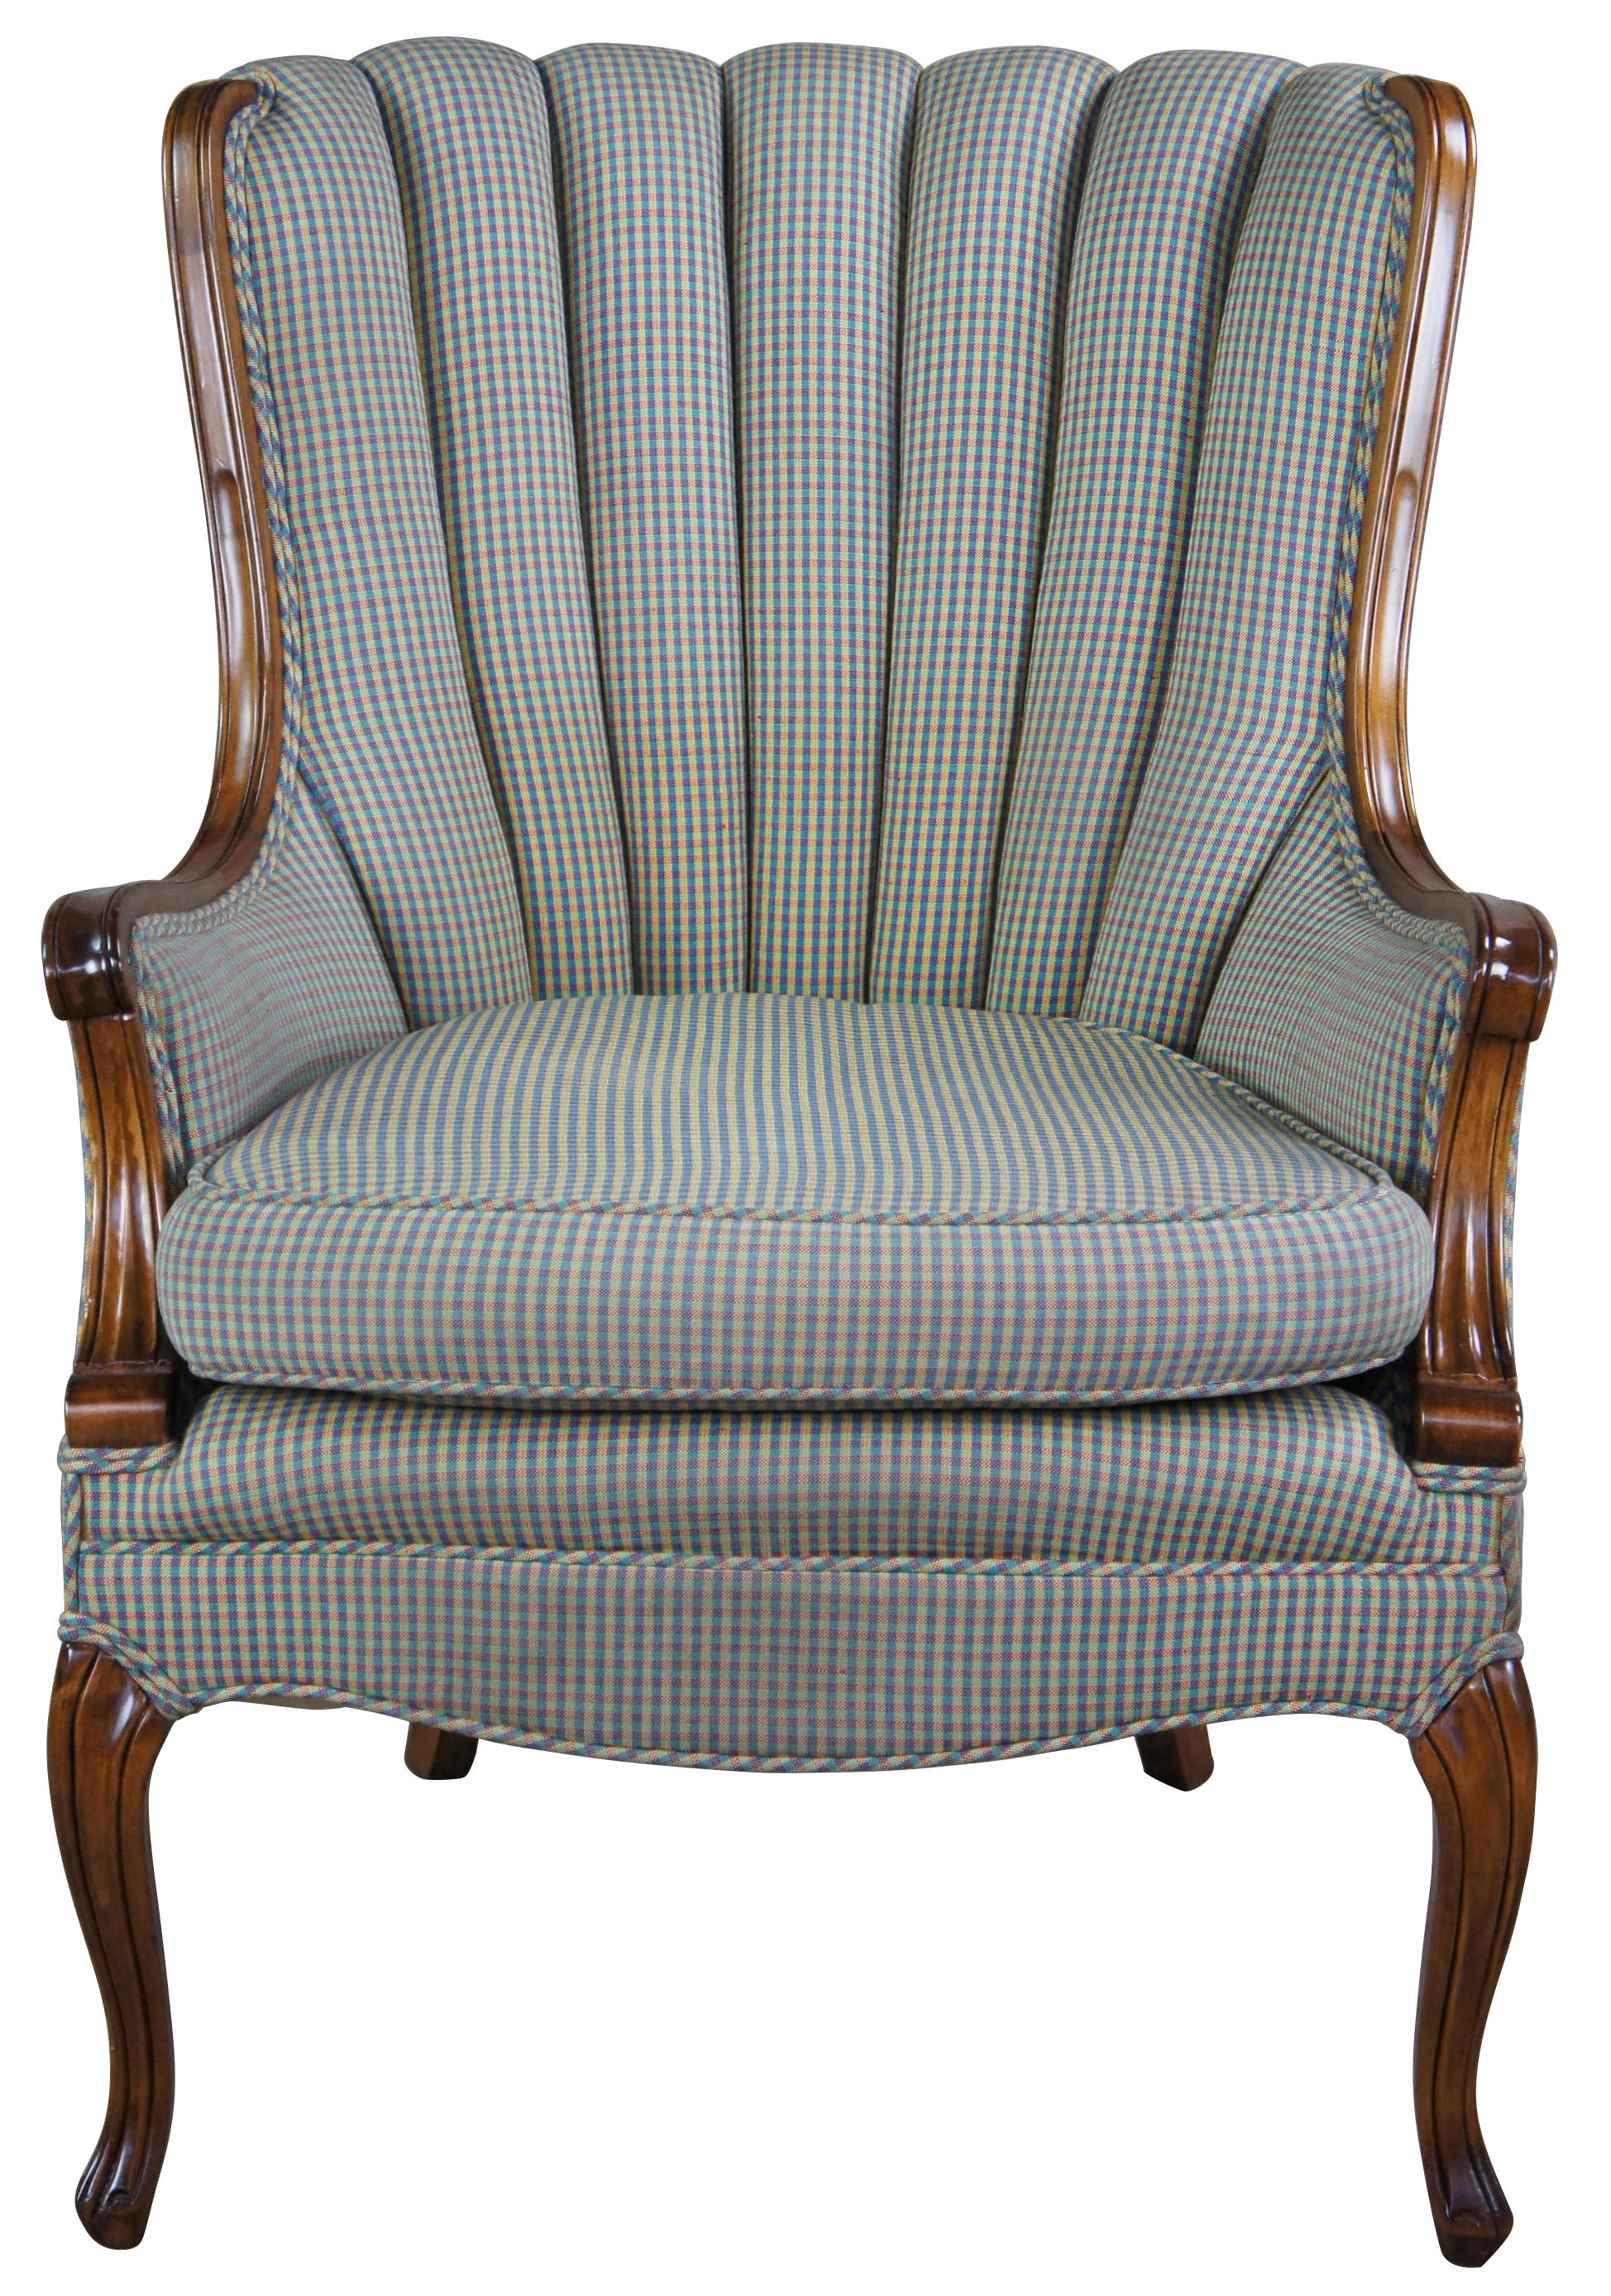 Mid century upholstered walnut armchair featuring serpentine form with flared wingback and channel back design, plaid upholstery and fluted accents. Measures: 38